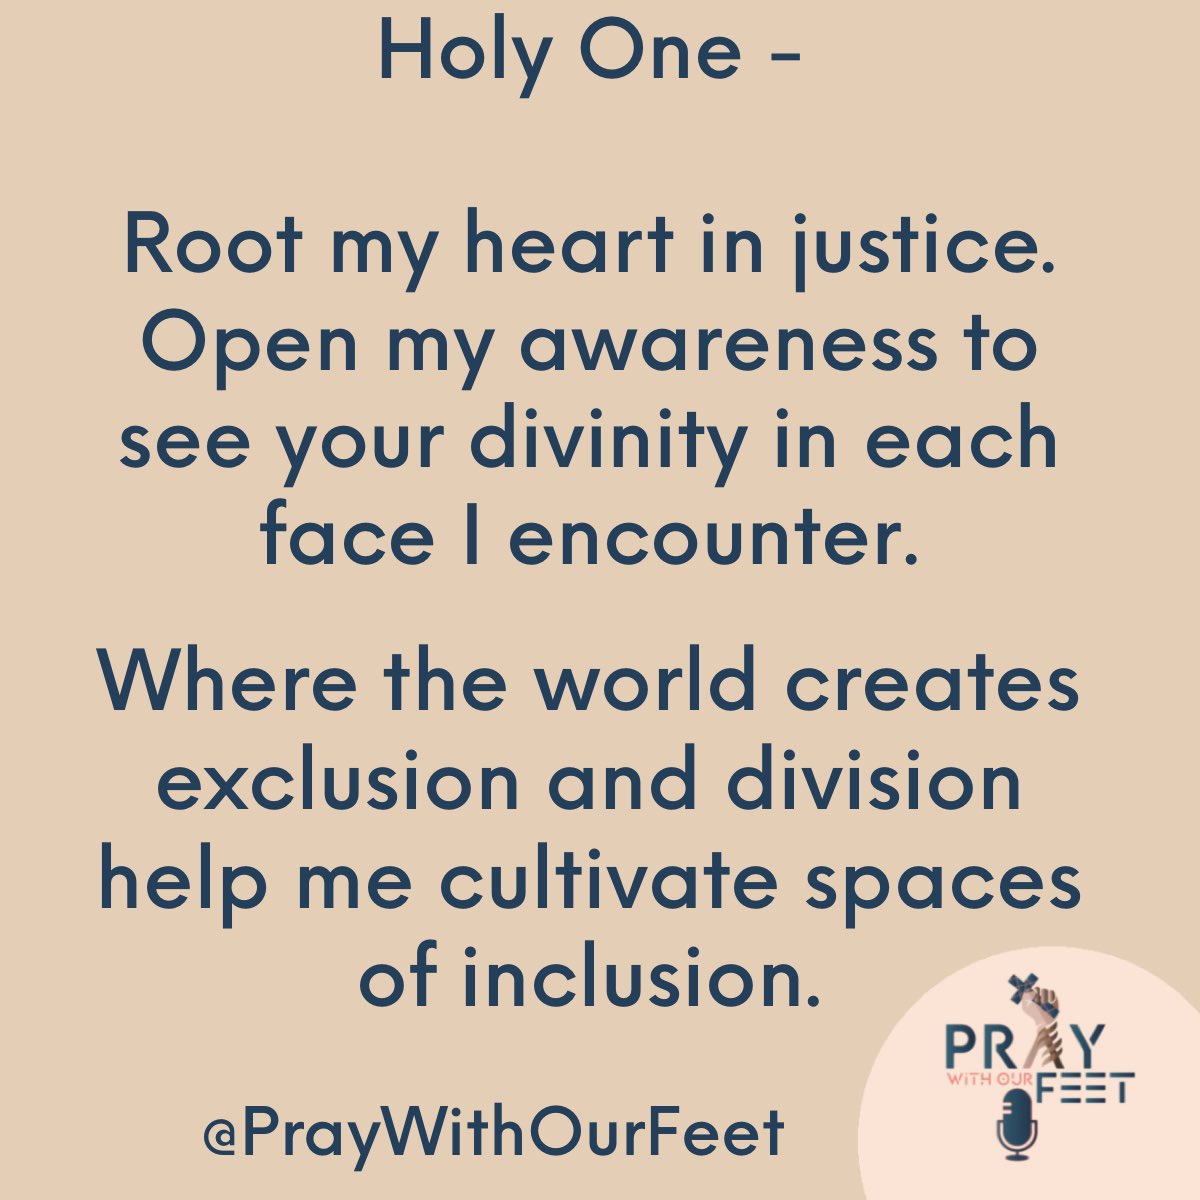 May we pray with our feet and awaken continually 👇🏾 #bethechange